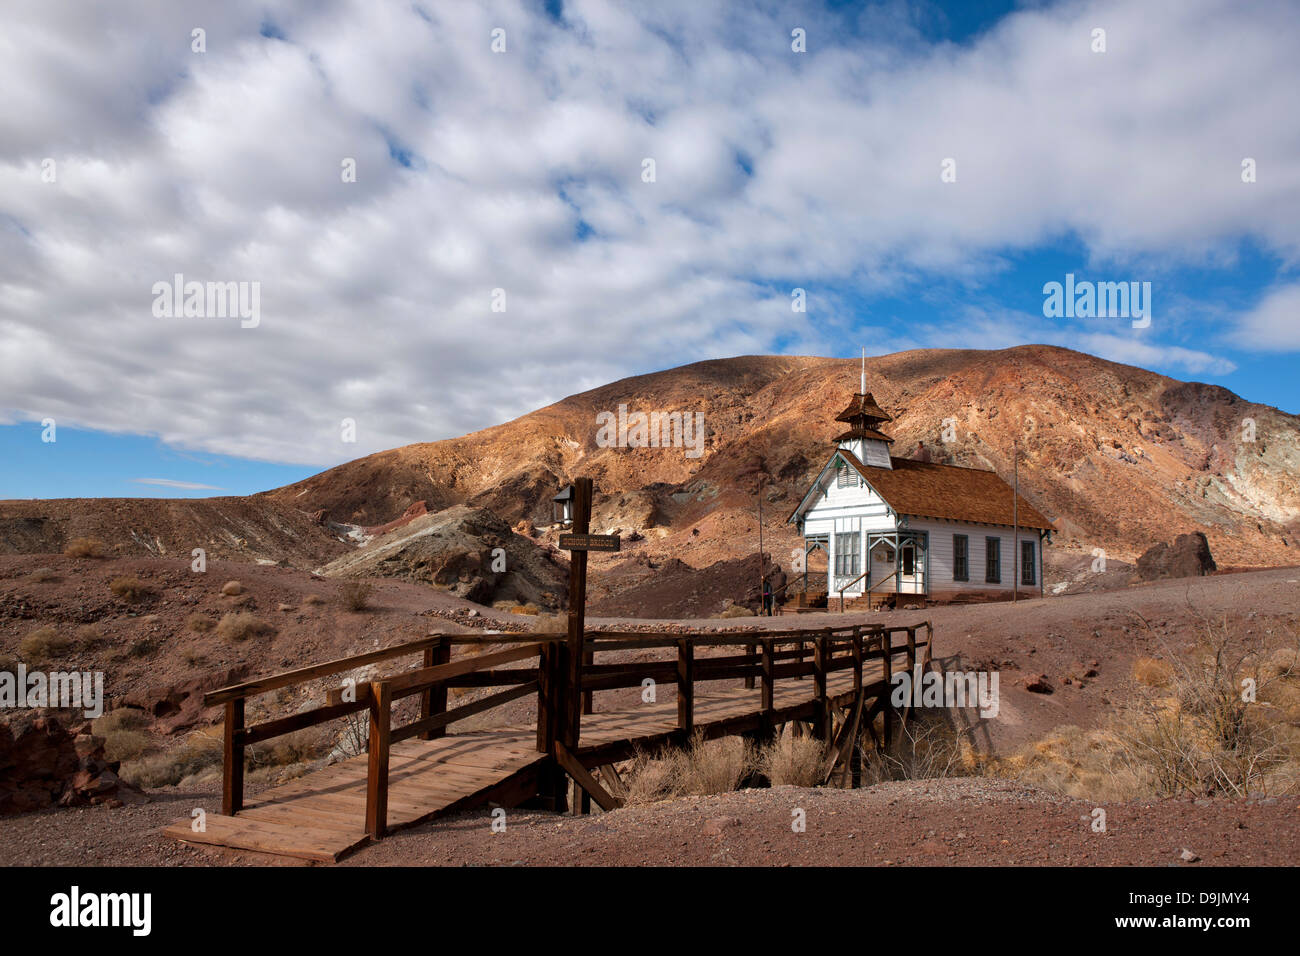 Historic one room school house, Calico Ghost Town, Calico, California, United States of America Stock Photo